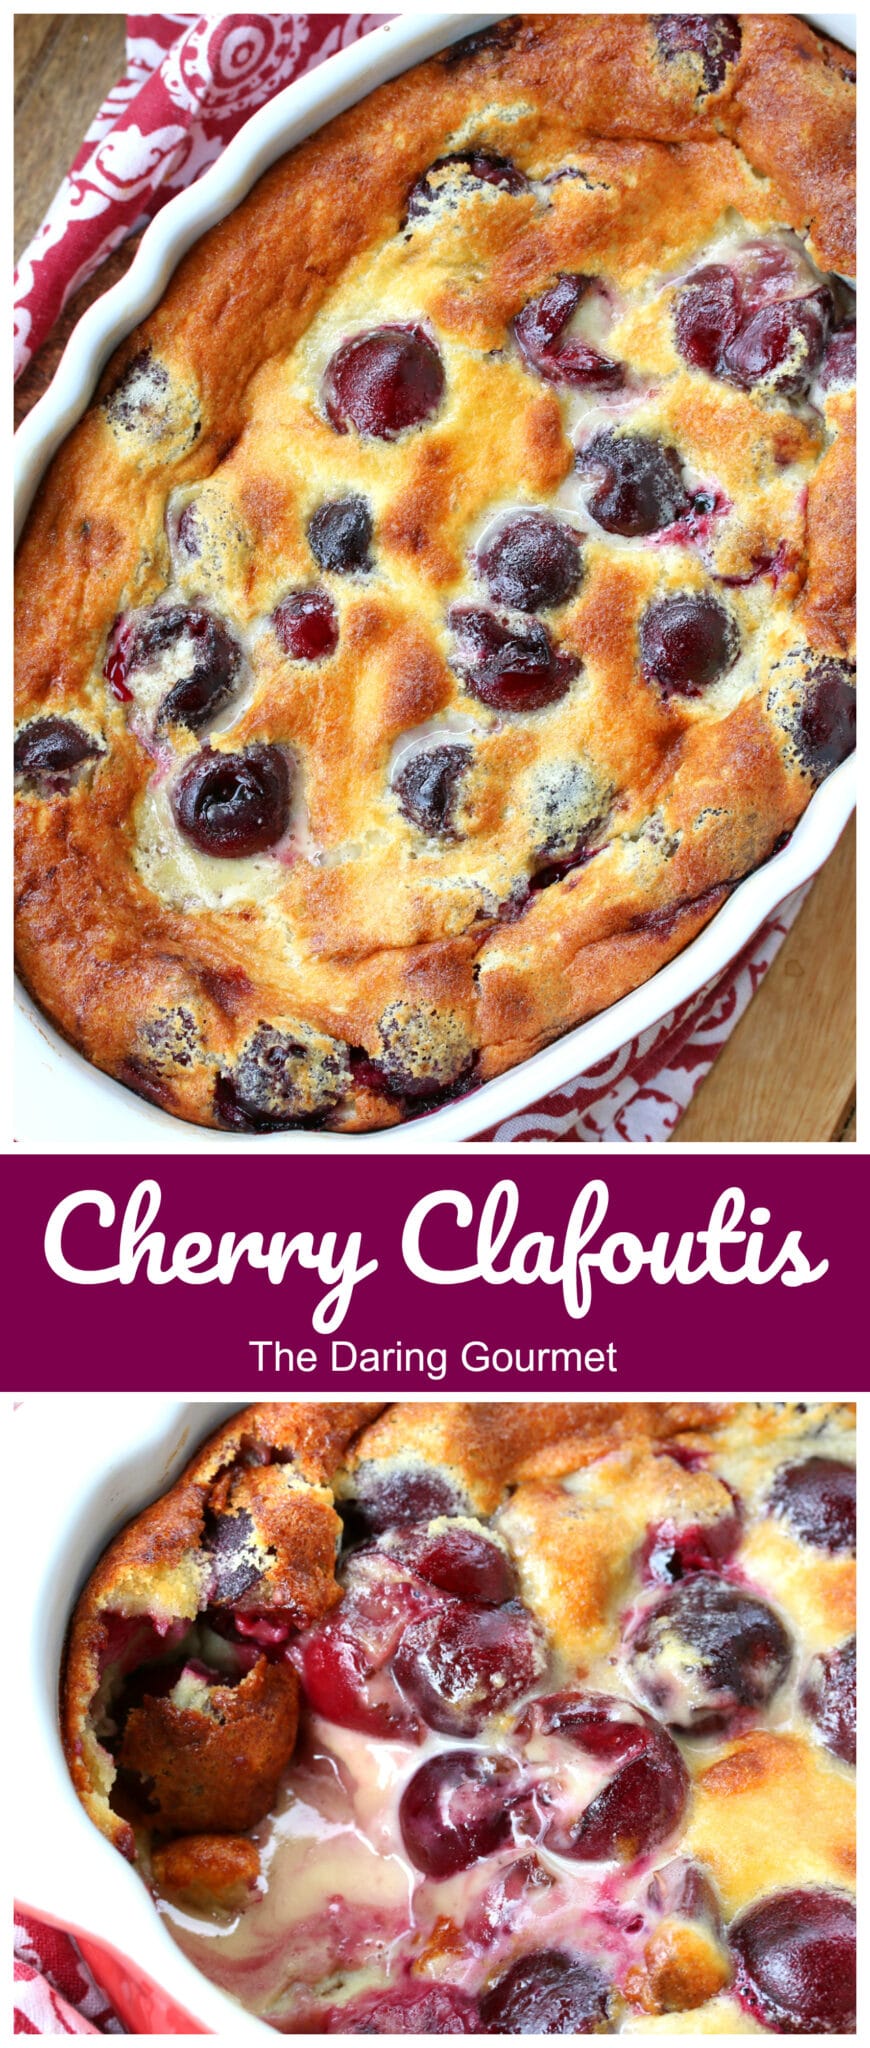 cherry clafoutis recipe best traditional authentic French almond